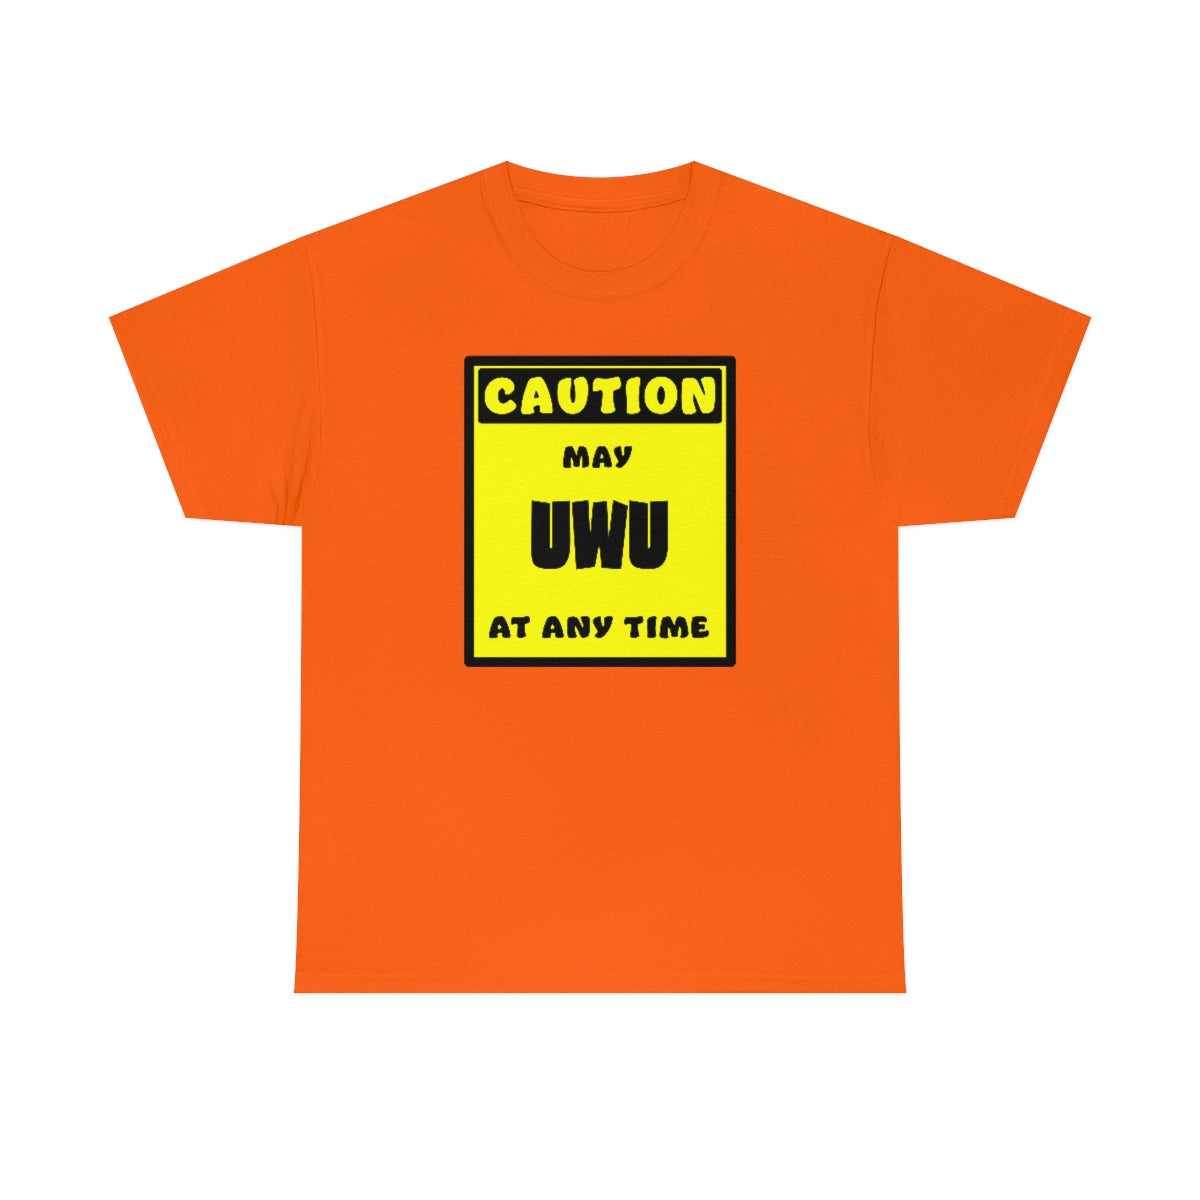 CAUTION! May UWU at any time! - T-Shirt T-Shirt AFLT-Whootorca Orange S 